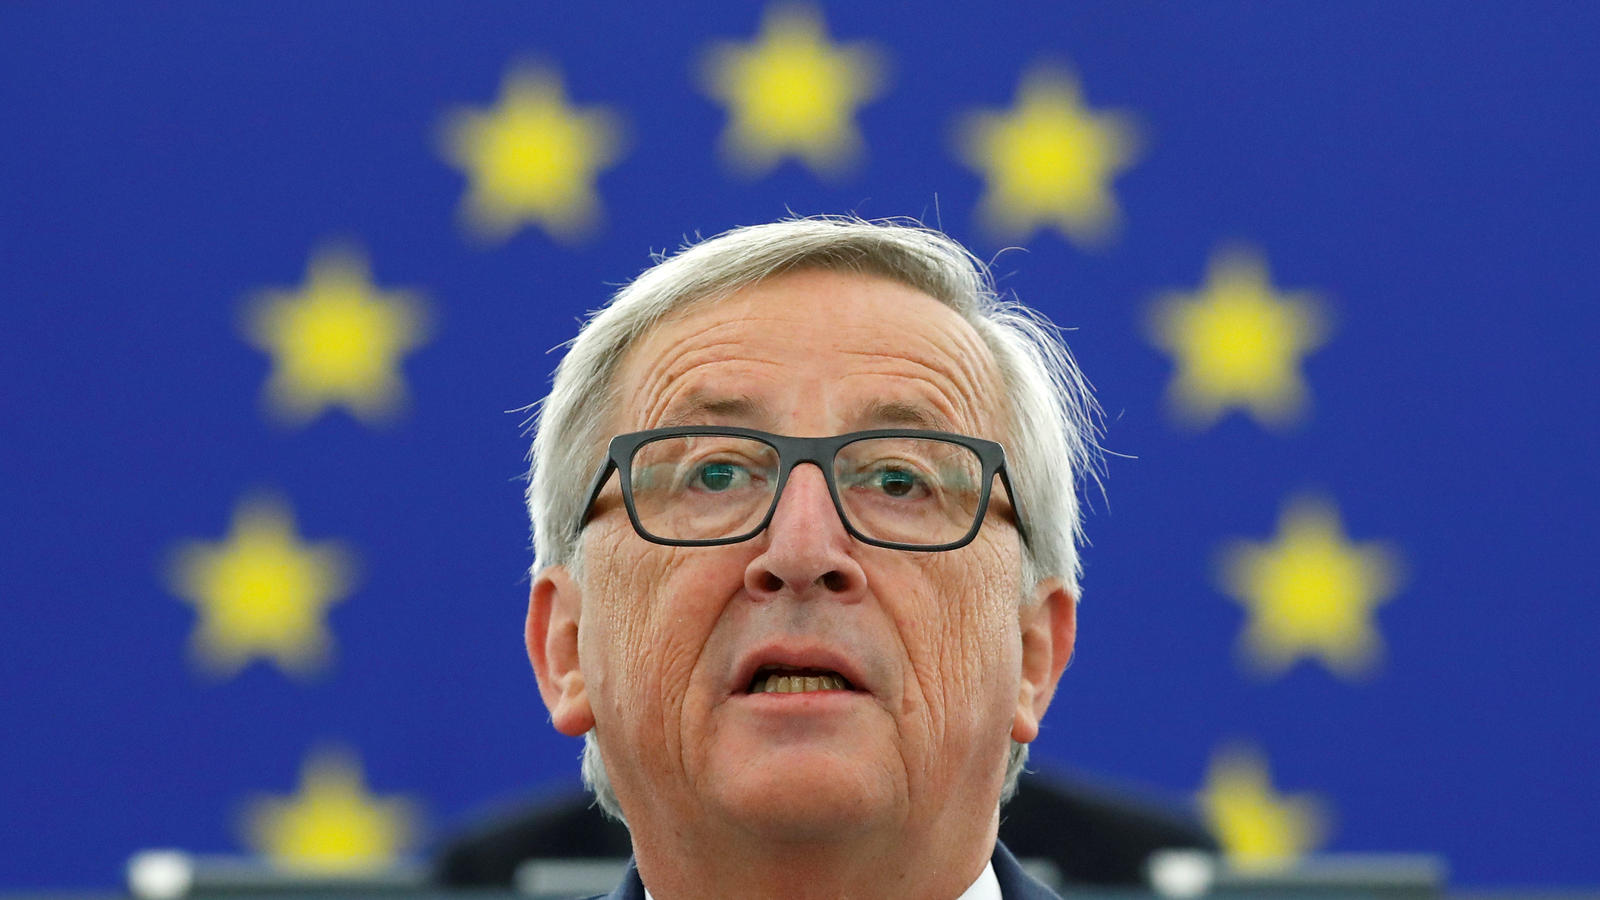 European Commission President Juncker addresses the European Parliament during a debate on The State of the European Union in Strasbourg